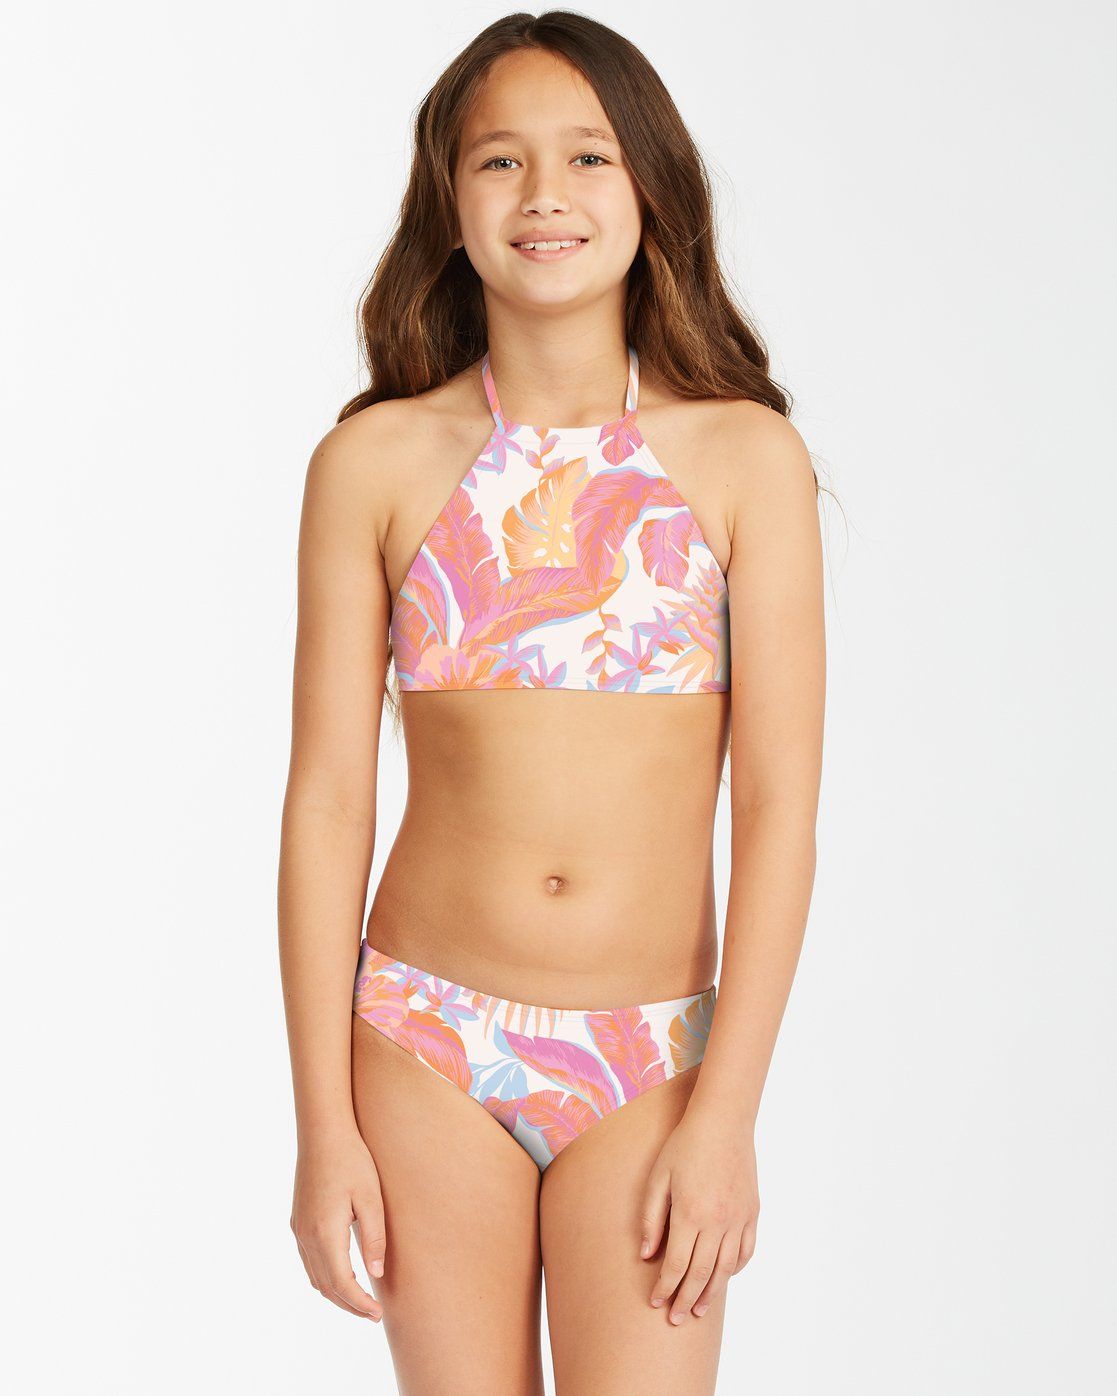 BILLABONG So Stoked One Piece Swimsuit Girls Multi